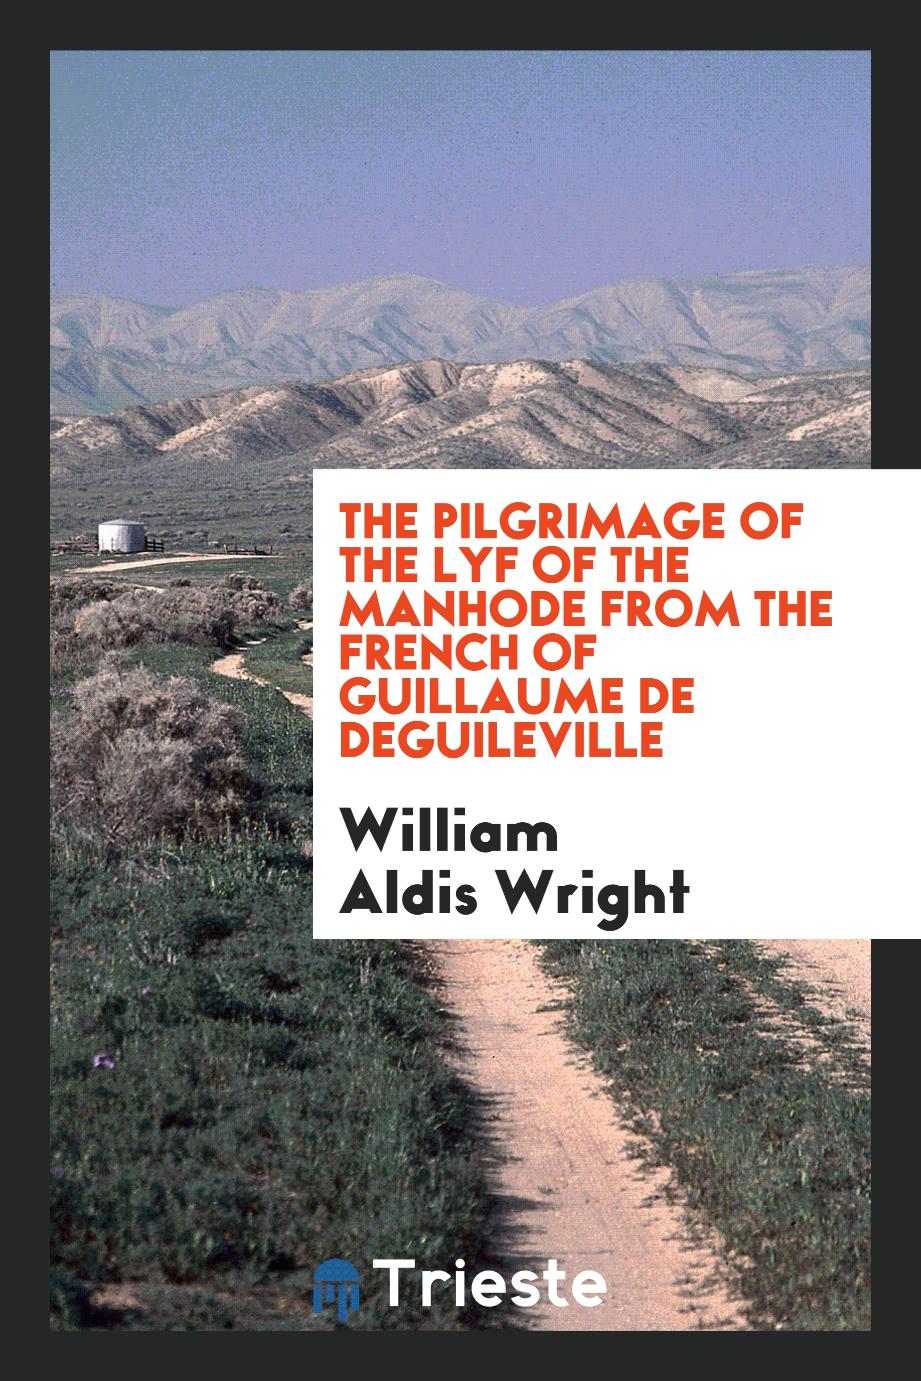 The pilgrimage of the lyf of the manhode from the french of Guillaume de Deguileville